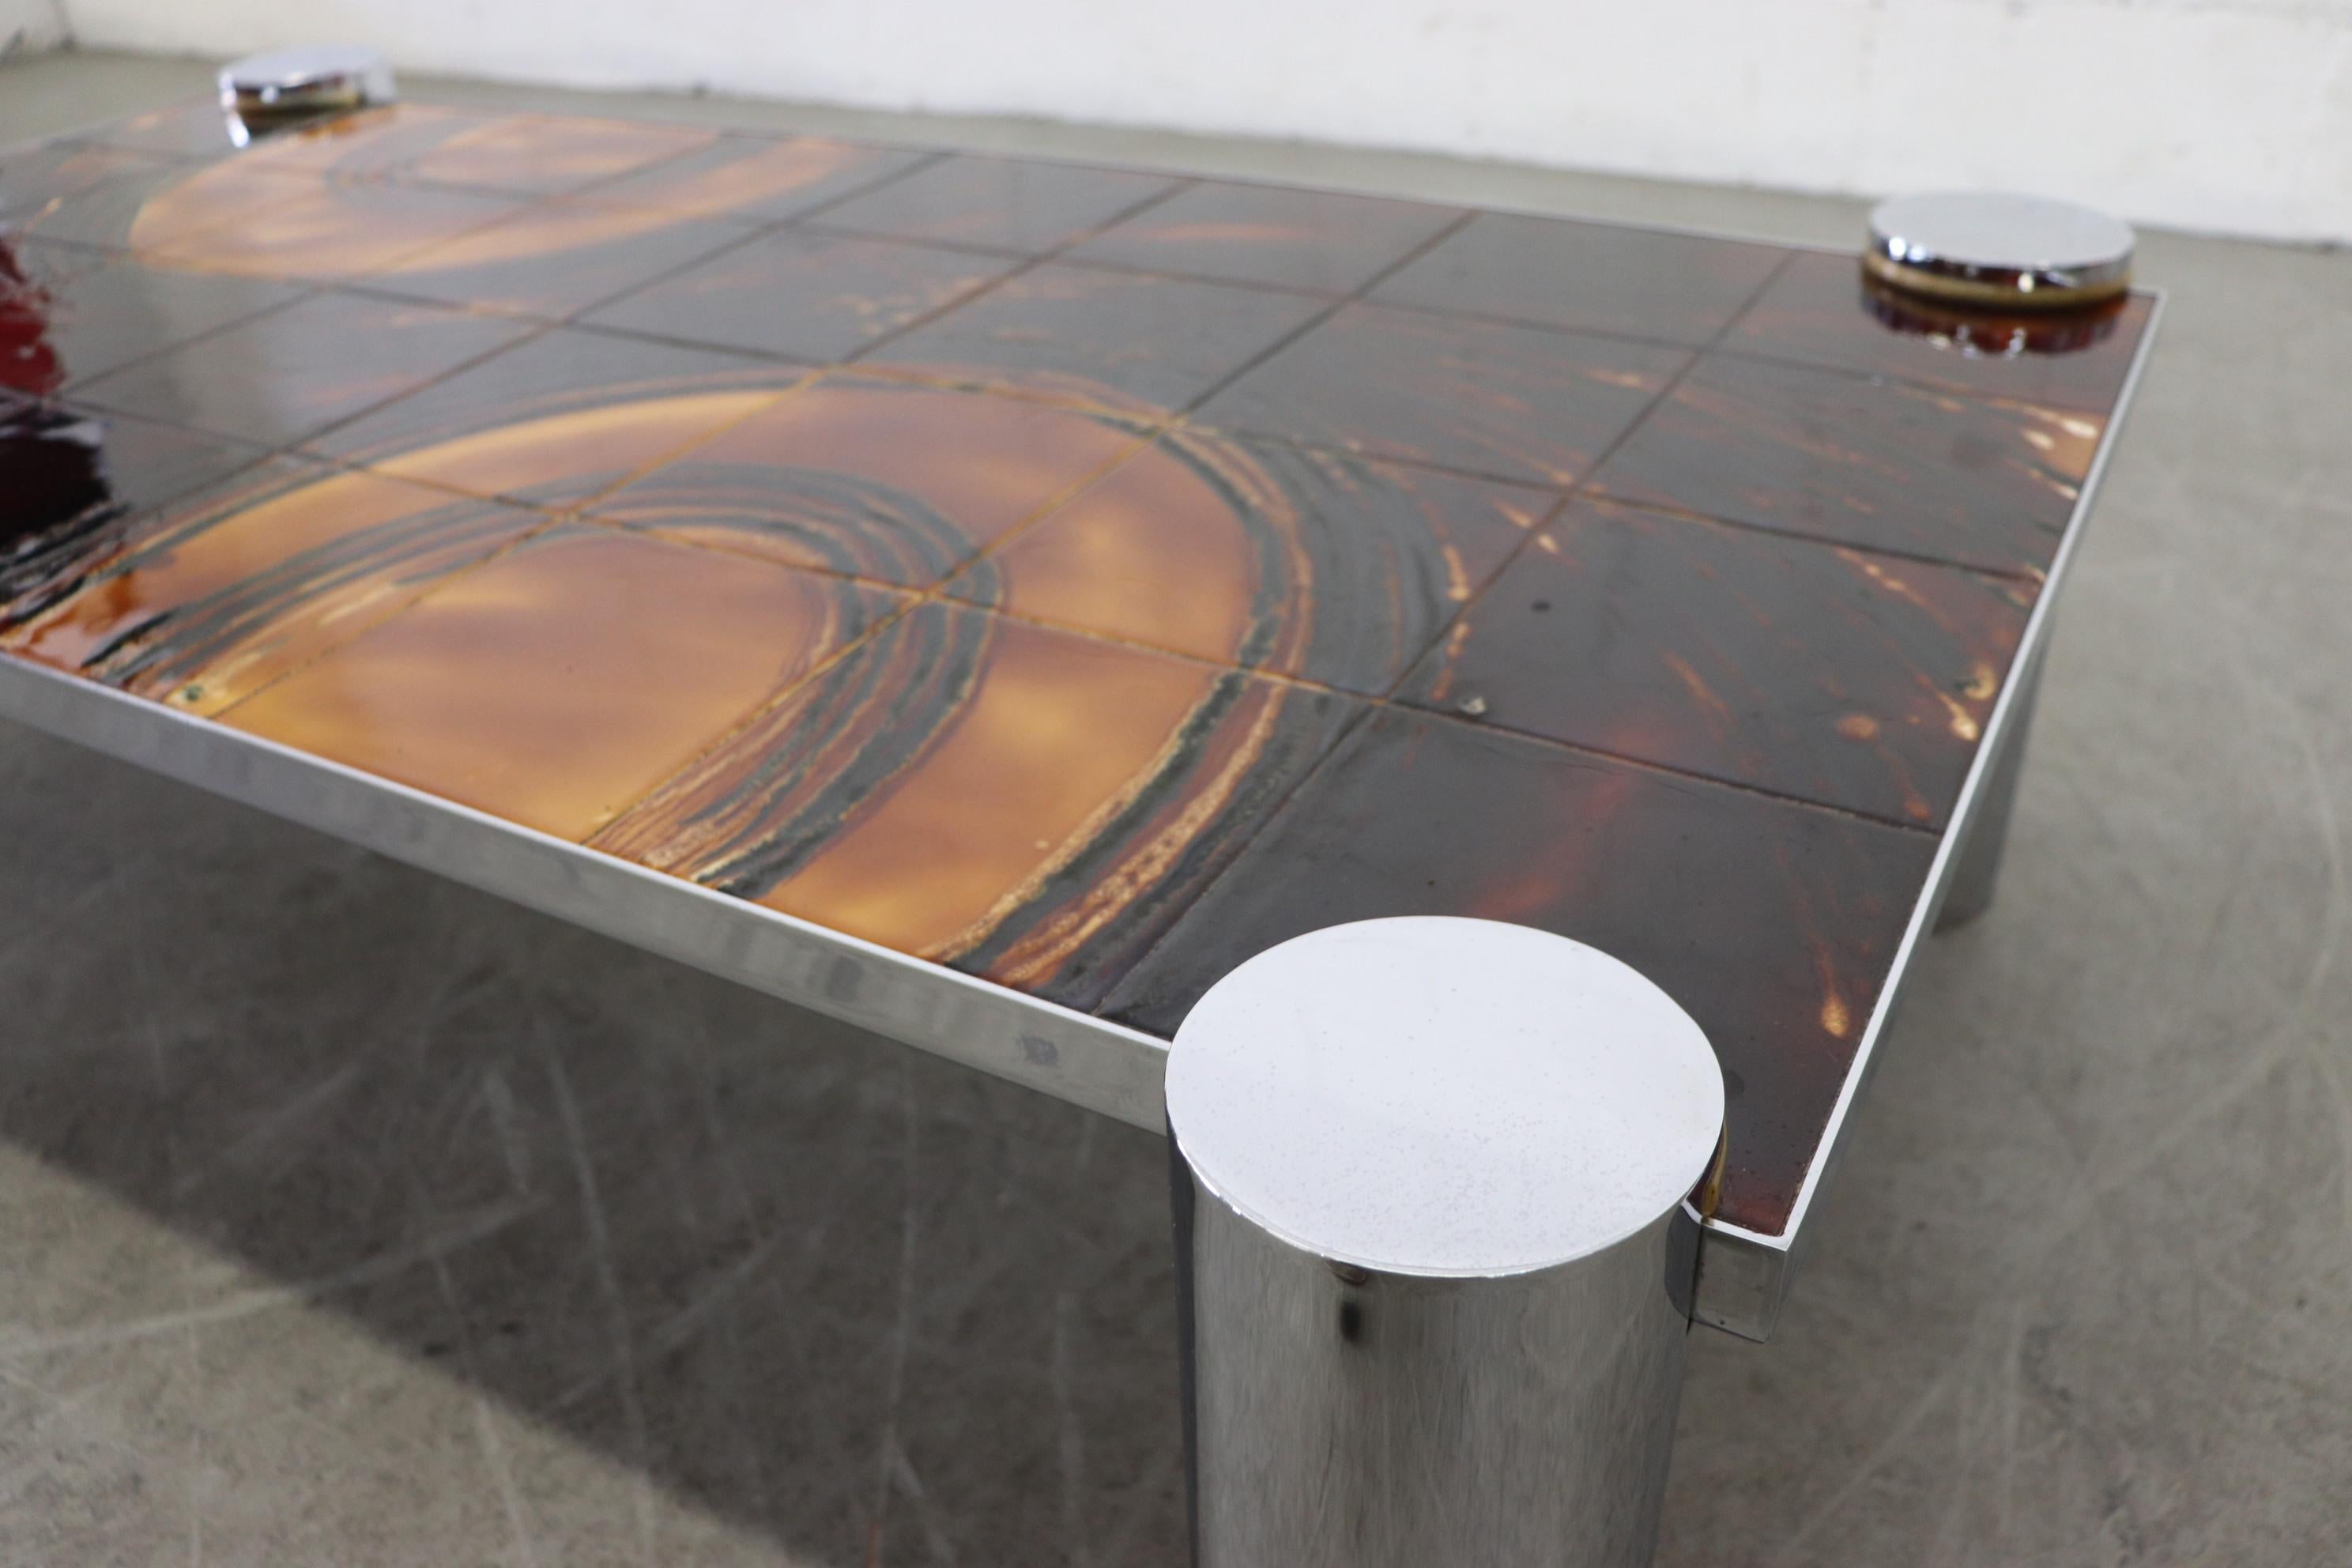 Belarti Style Ceramic Tile Topped Coffee Table 3